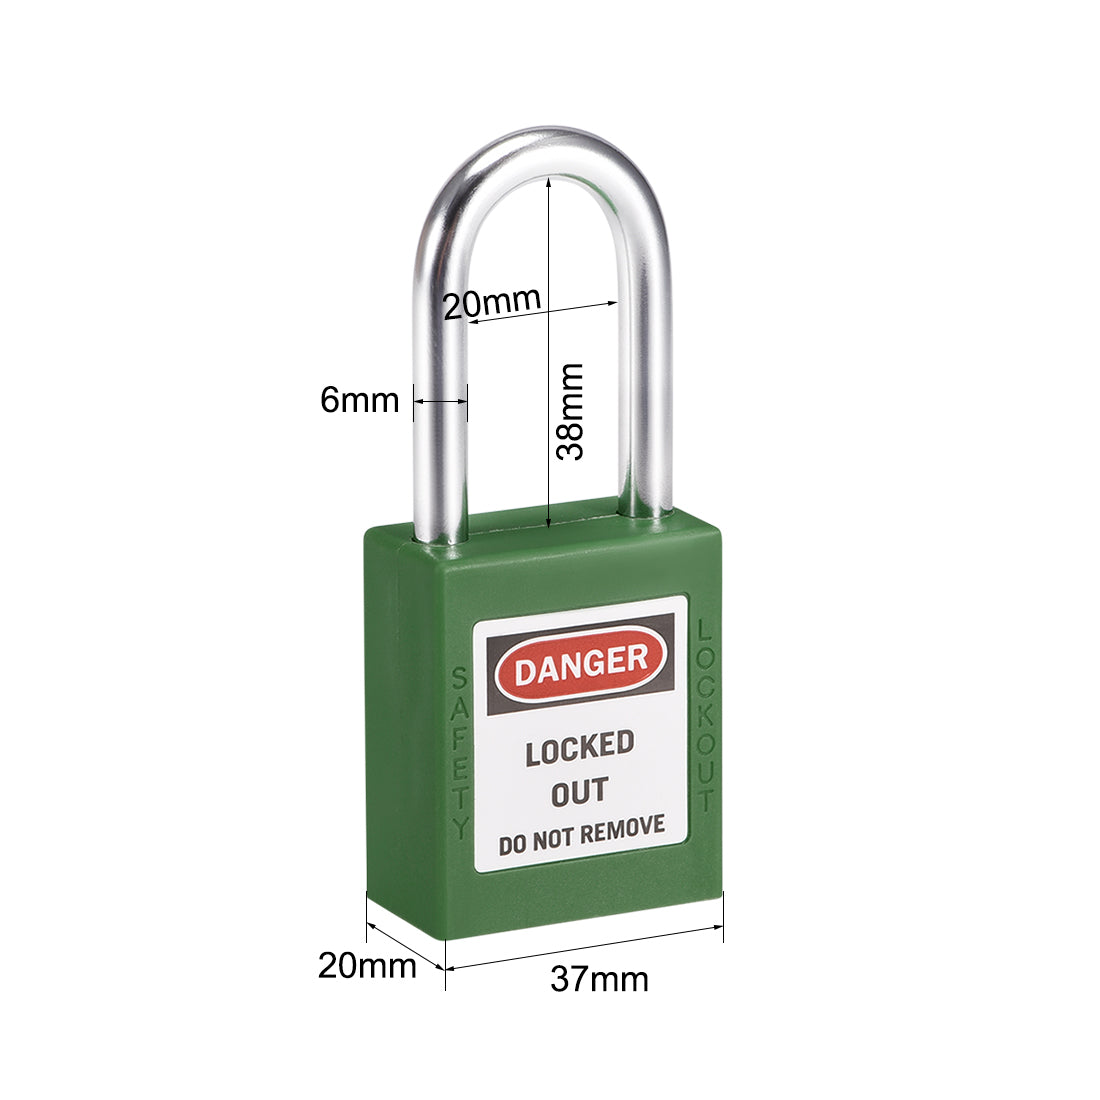 uxcell Uxcell Lockout Tagout Safety Padlock 38mm Steel Shackle Keyed Different Green